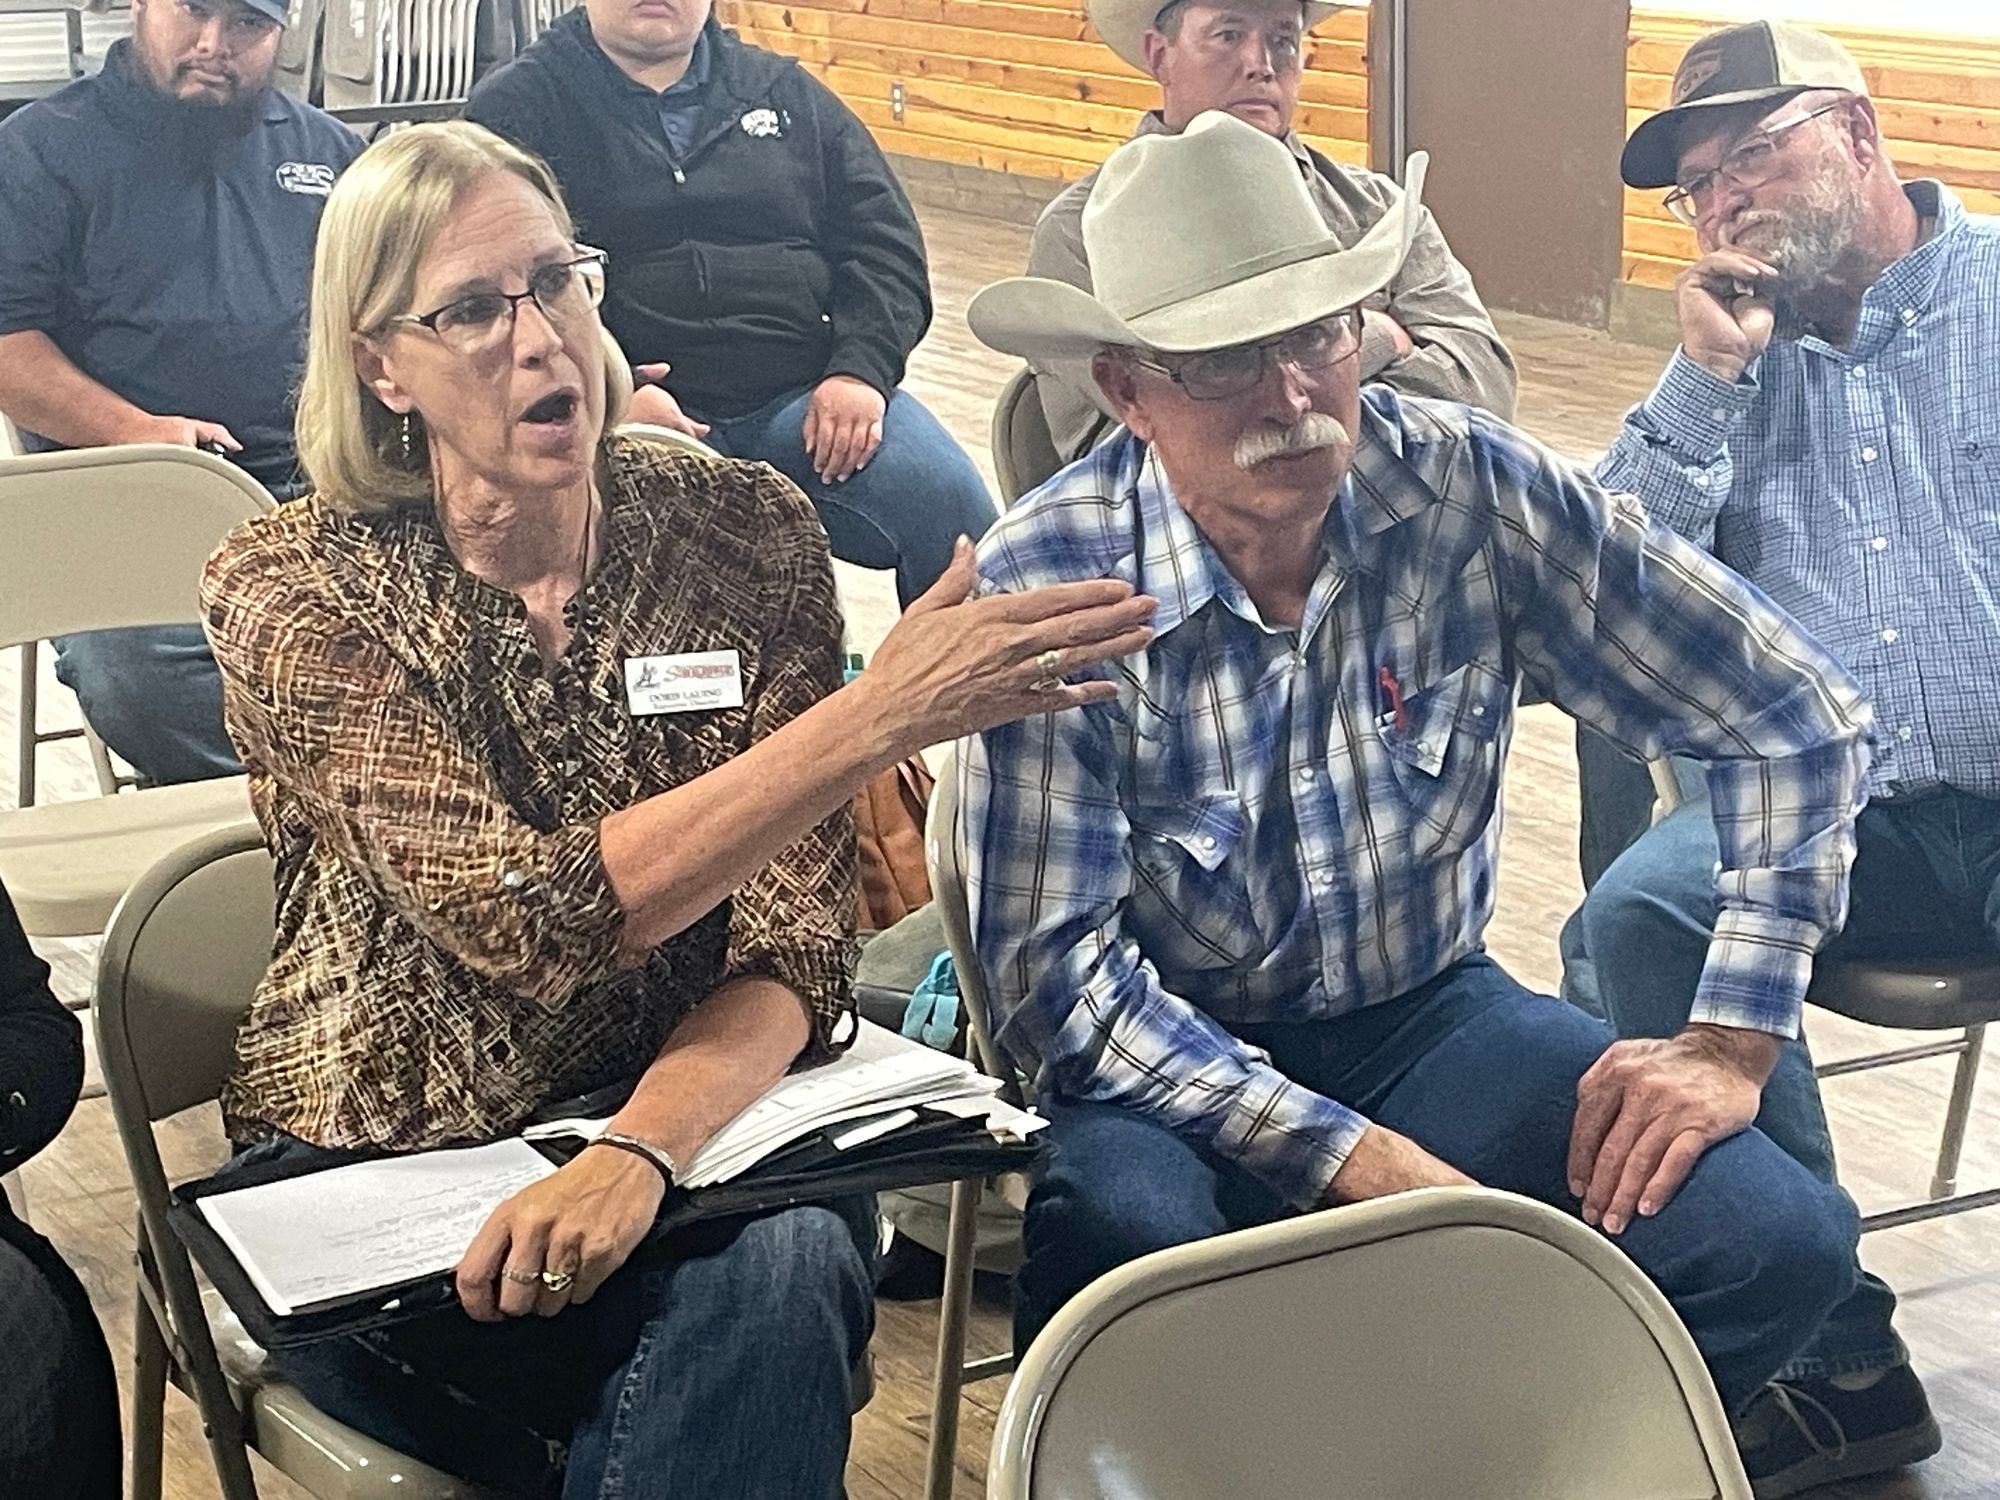 Doris Lauing speaks in favor of a proposed new meat plant in New Underwood, S.D.